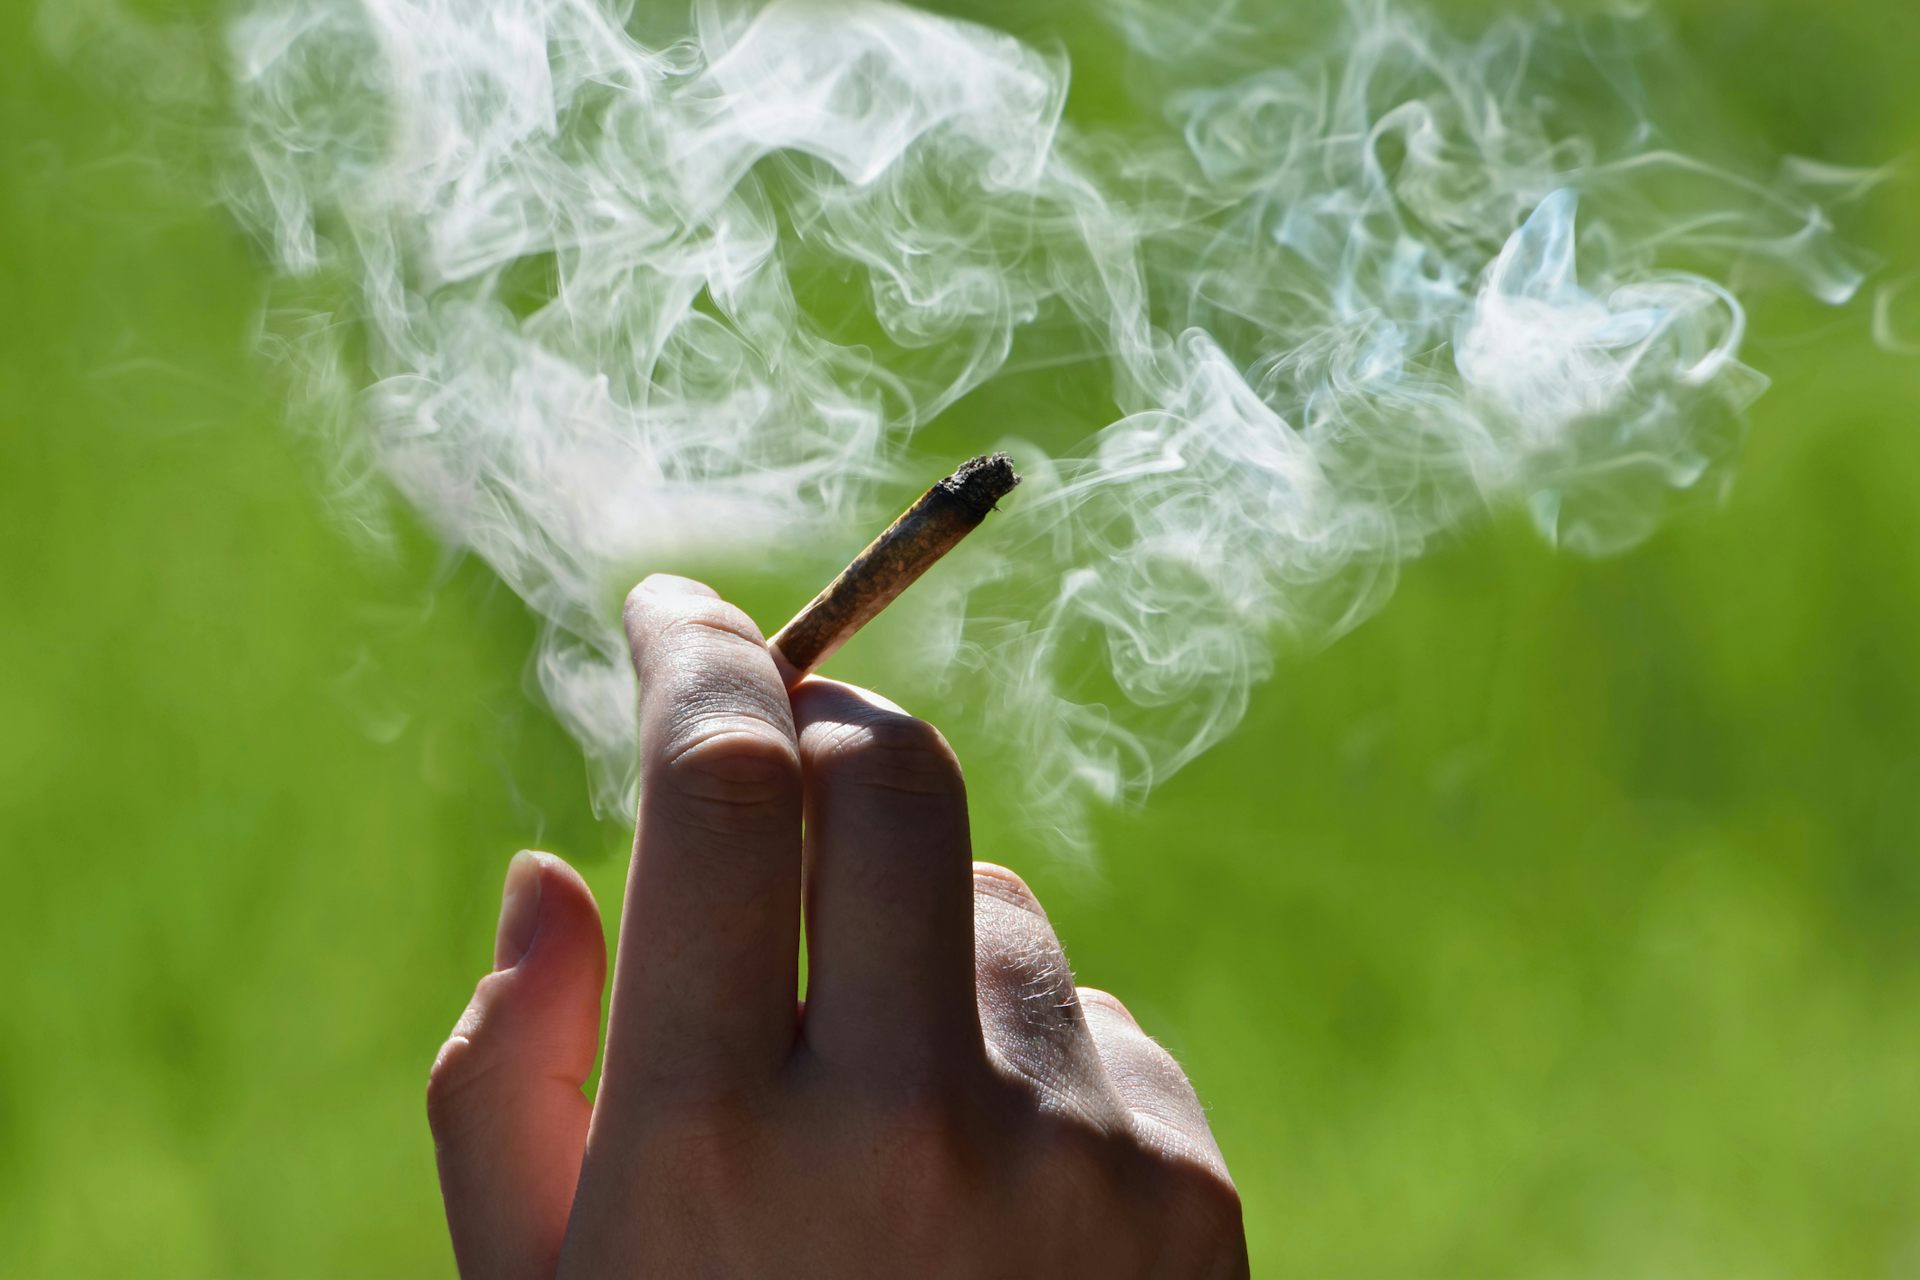 Many people think cannabis smoke is harmless − a physician explains how that belief can put people at risk